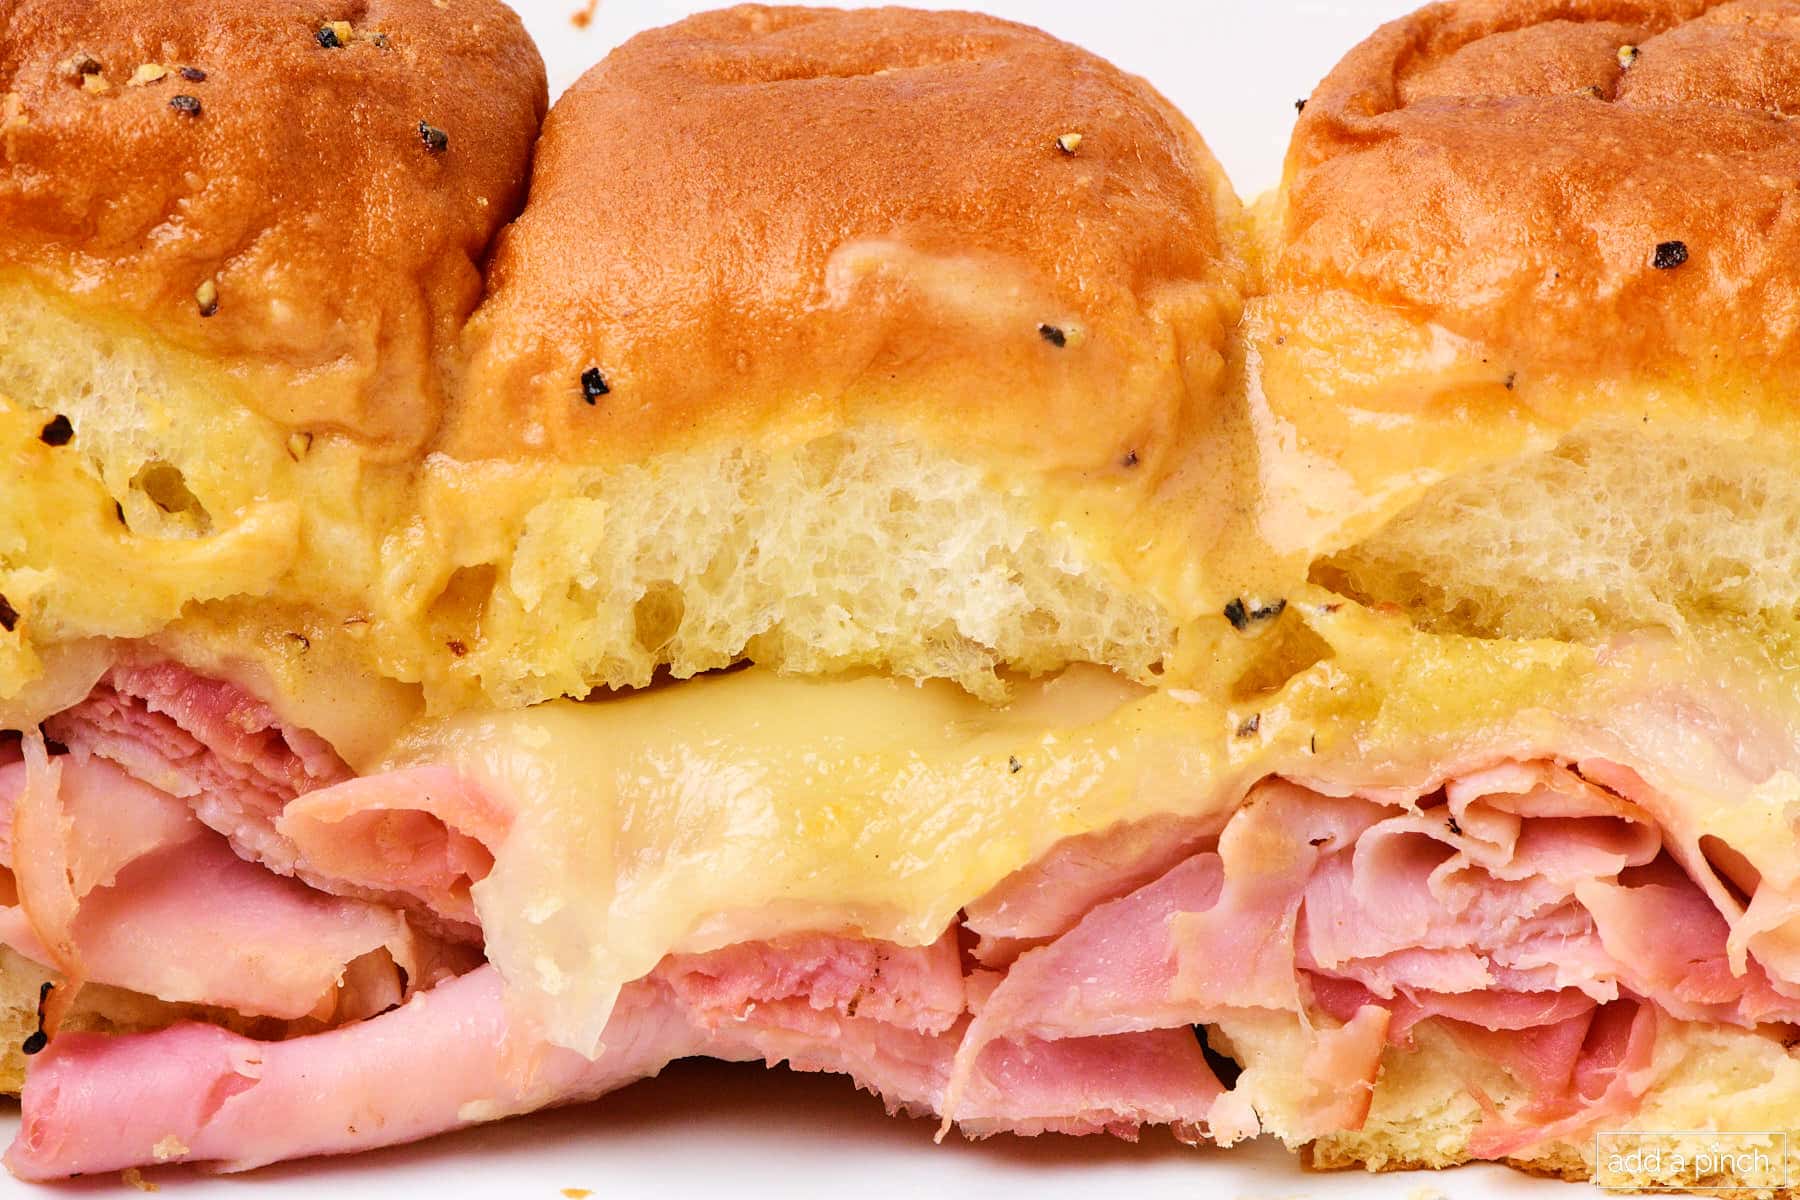 Hot ham and cheese sliders on a white plate.